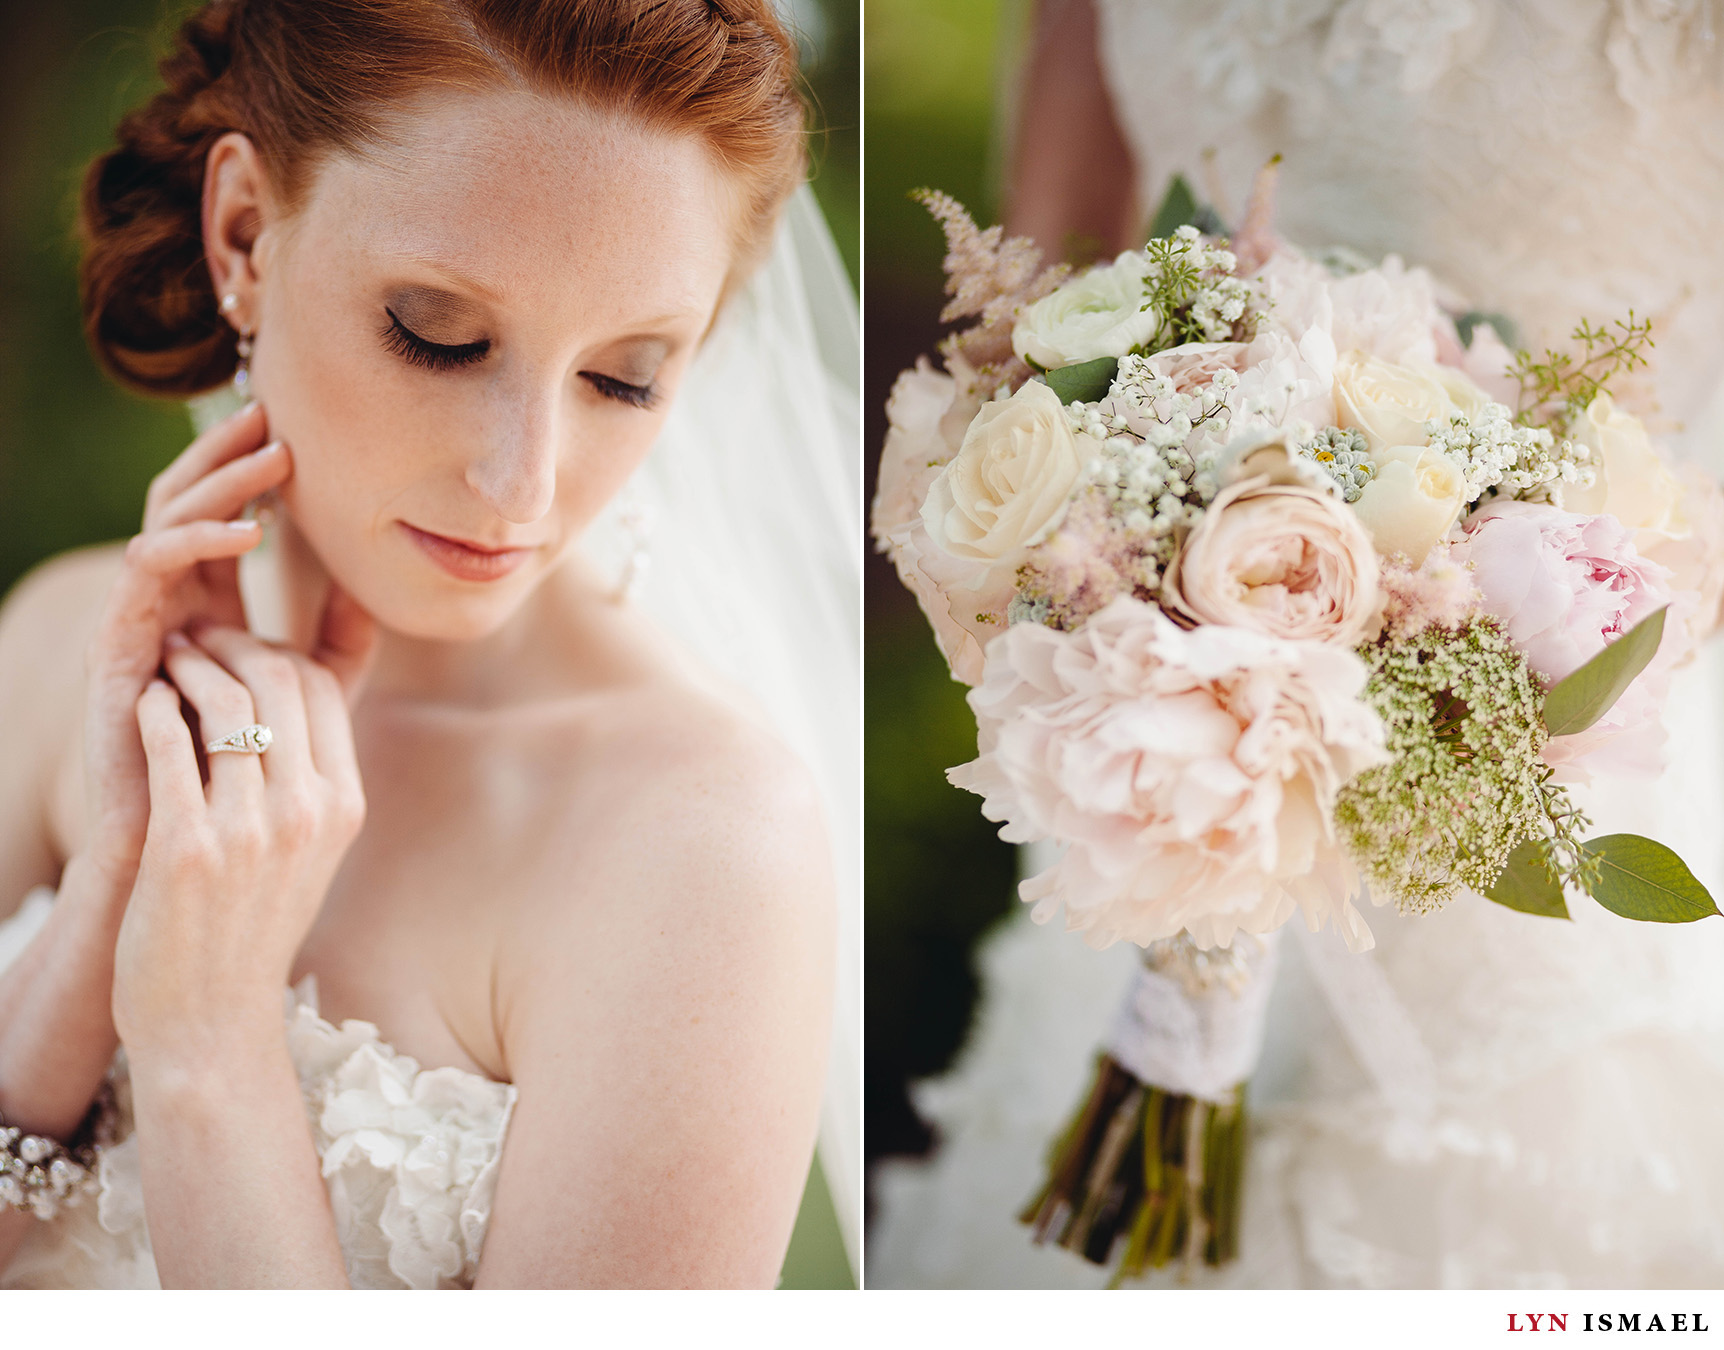 A beautiful portrait of a redhead bride and a bridal bouquet from Flowers More Often